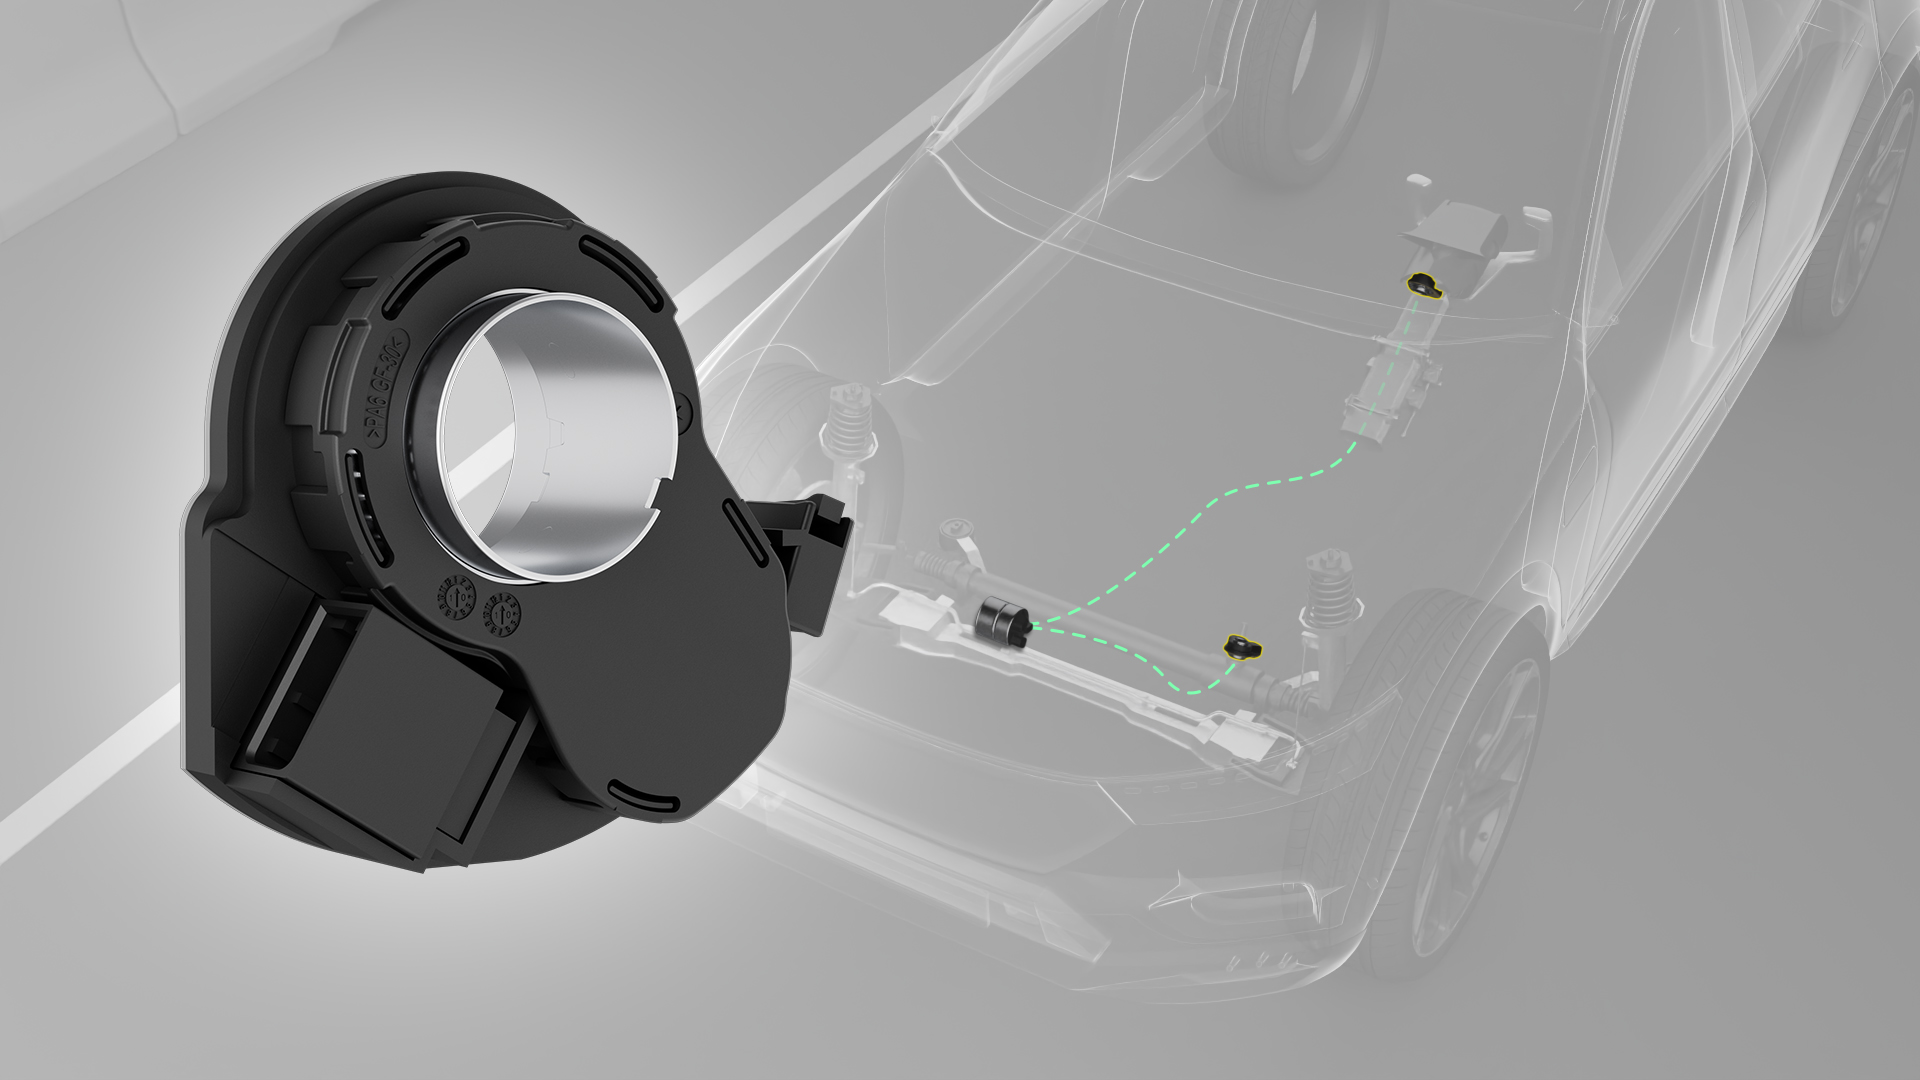 Steering technology of the future: HELLA supplies sensor technology for all-electric steer-by-wire systems